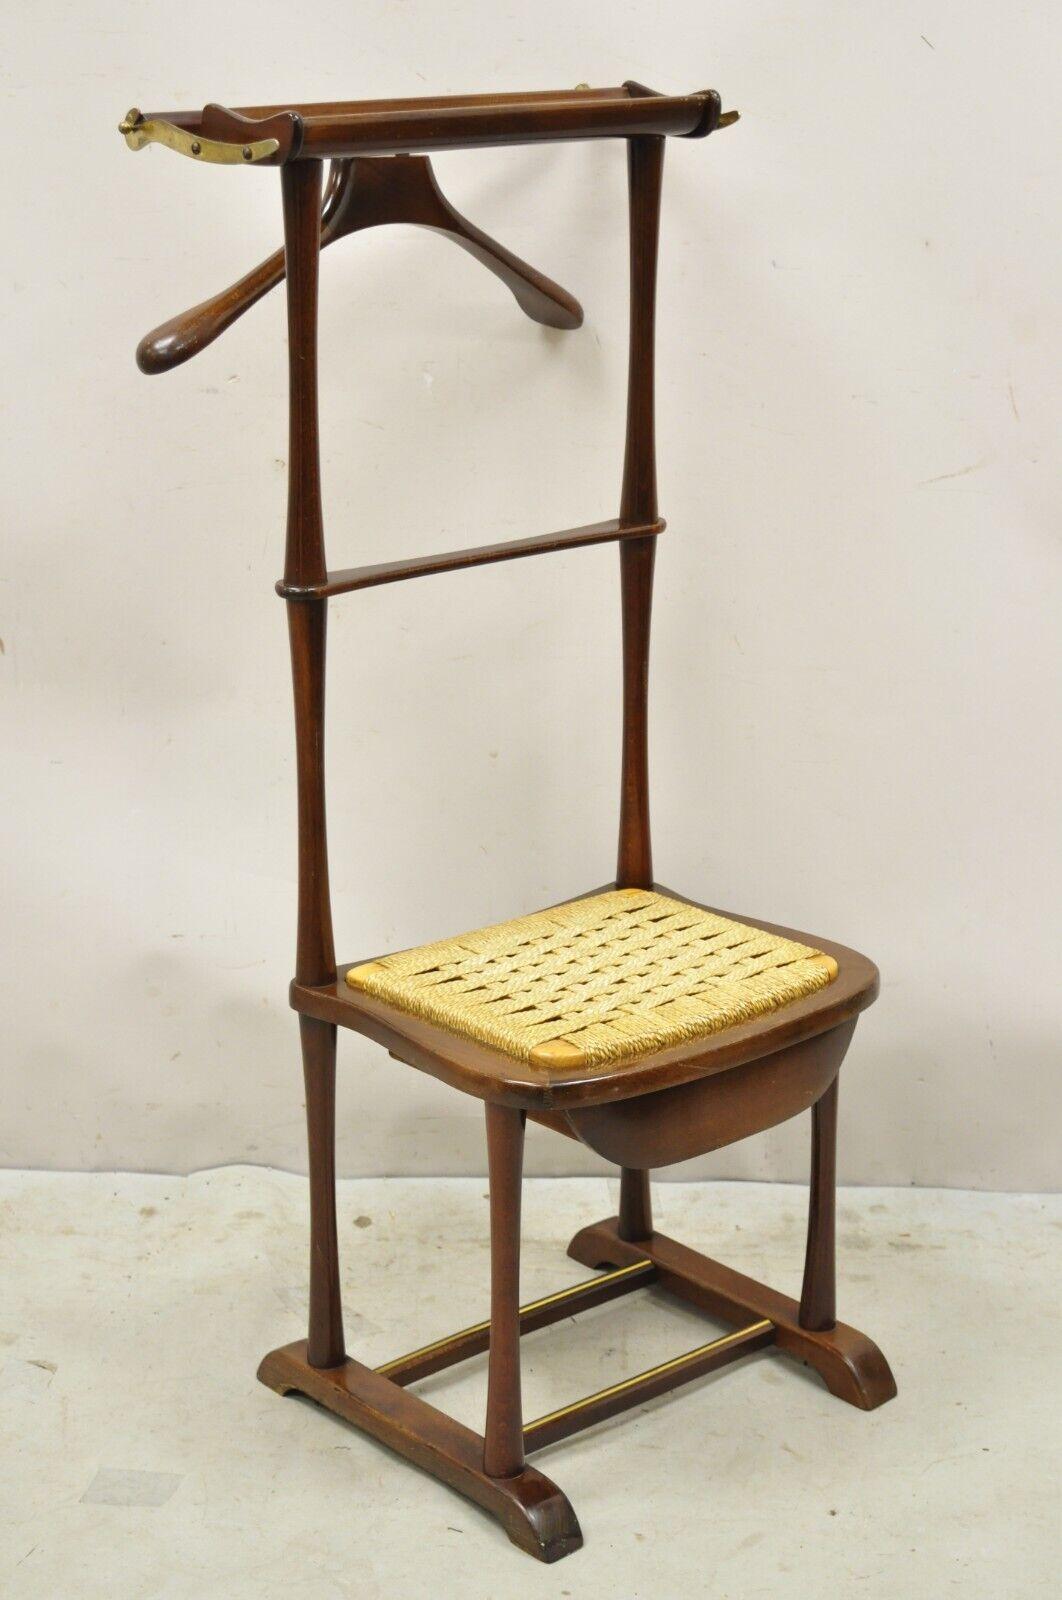 Vintage SPQR Mid Century Italian Modern Clothing Valet Seat Chair with Drawer For Sale 3